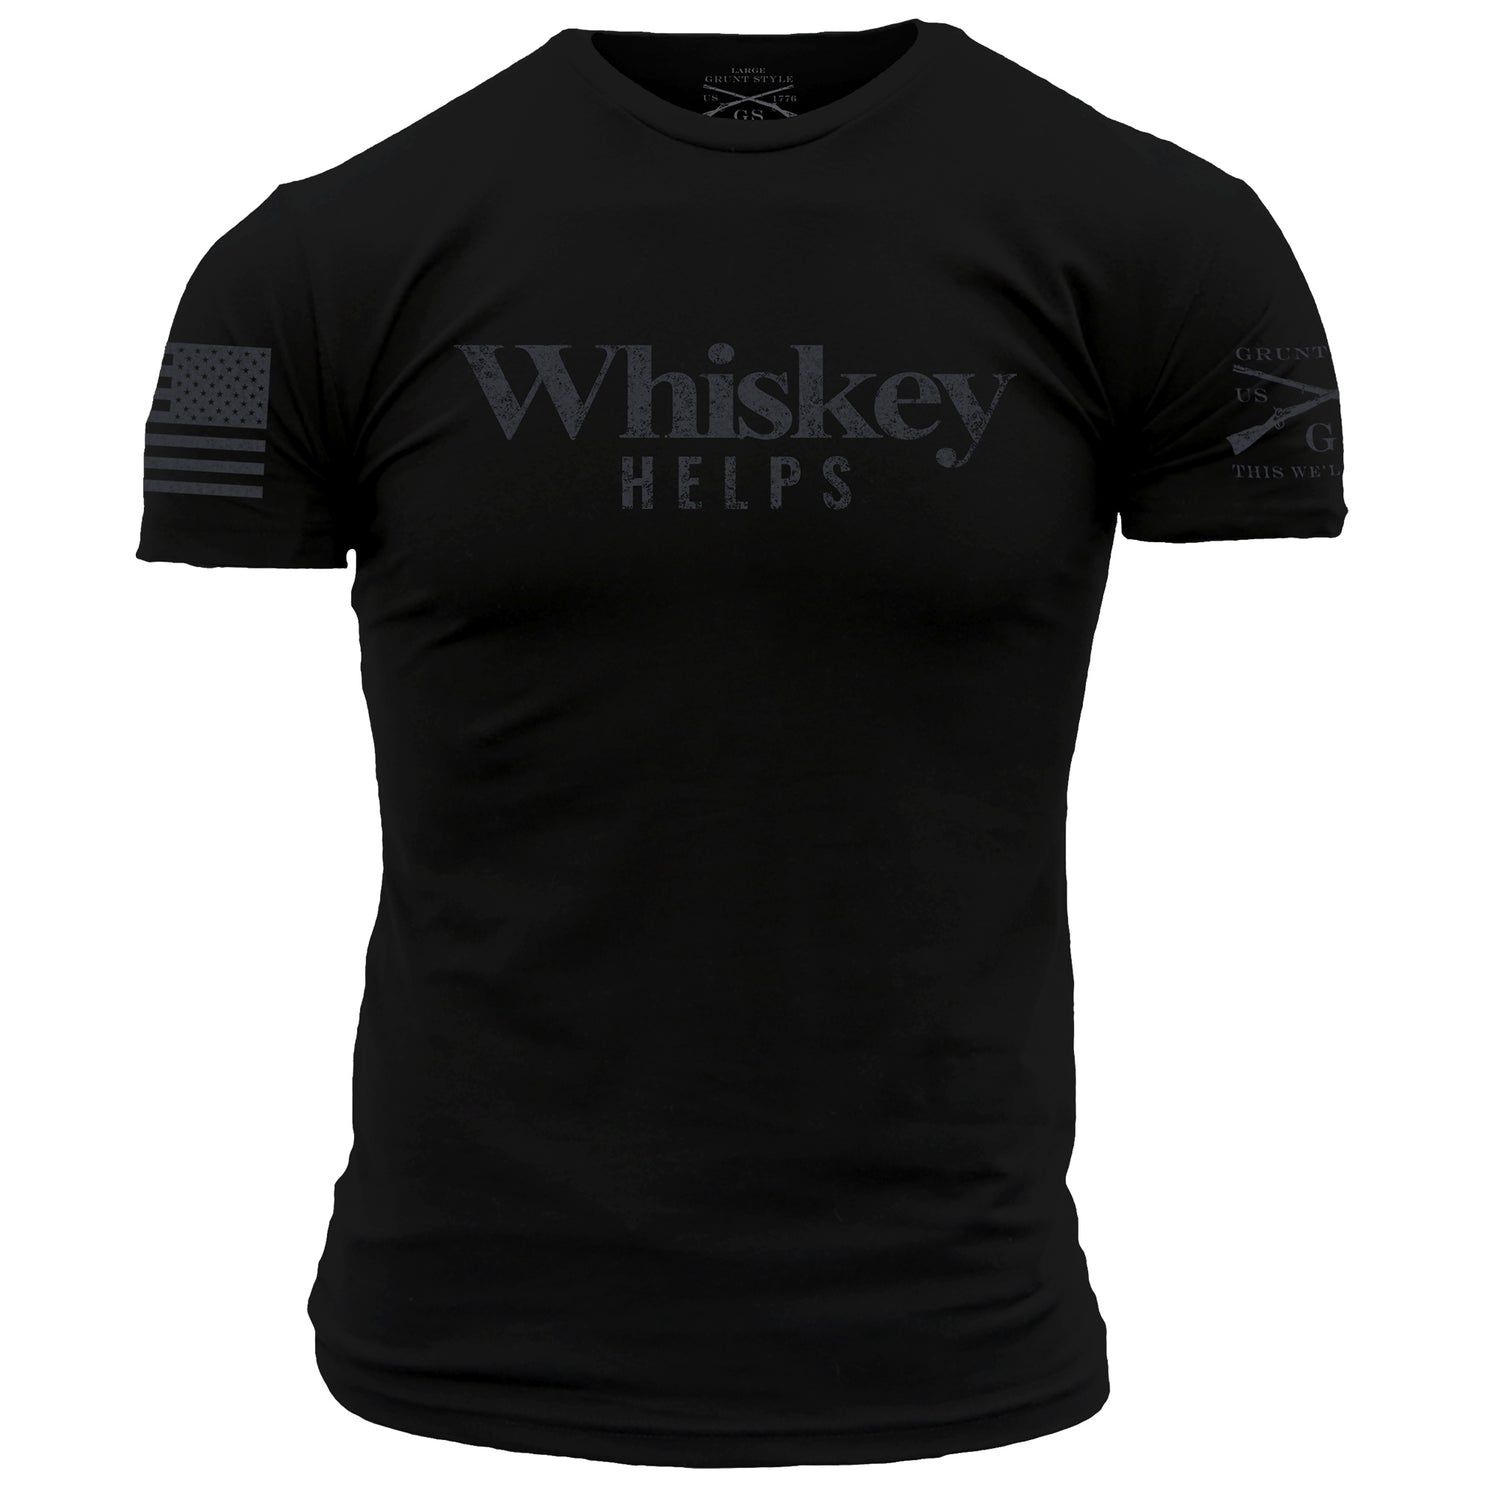 Men's Black Graphic Whiskey Helps Tee | Grunt Style 